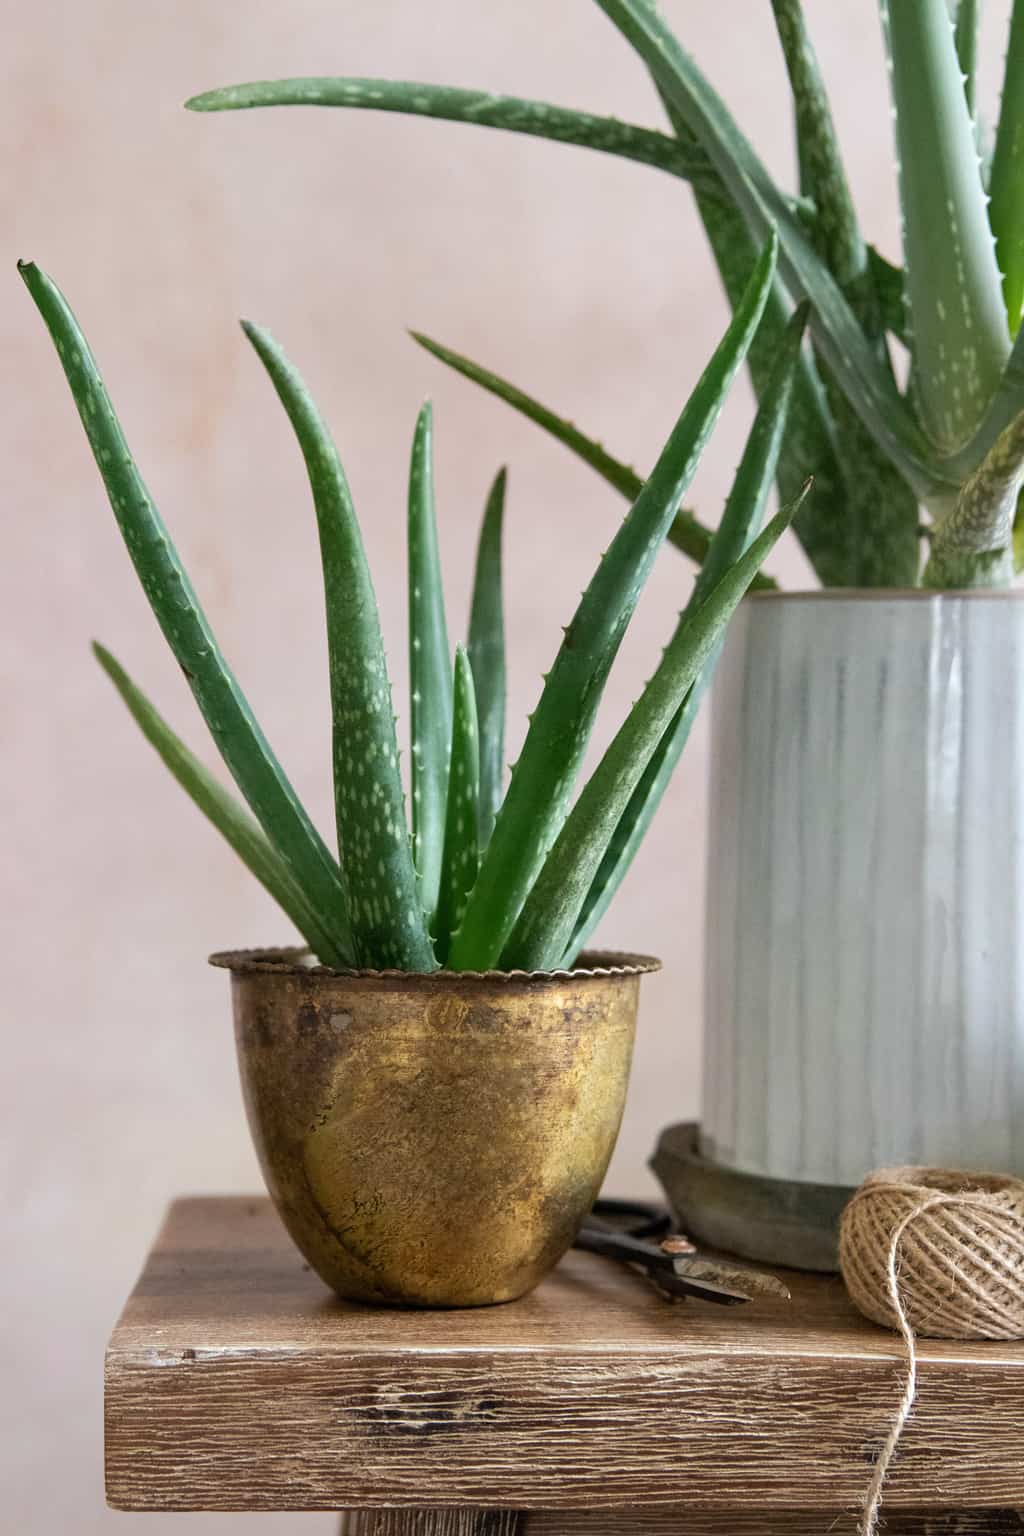 How to care for an aloe plant